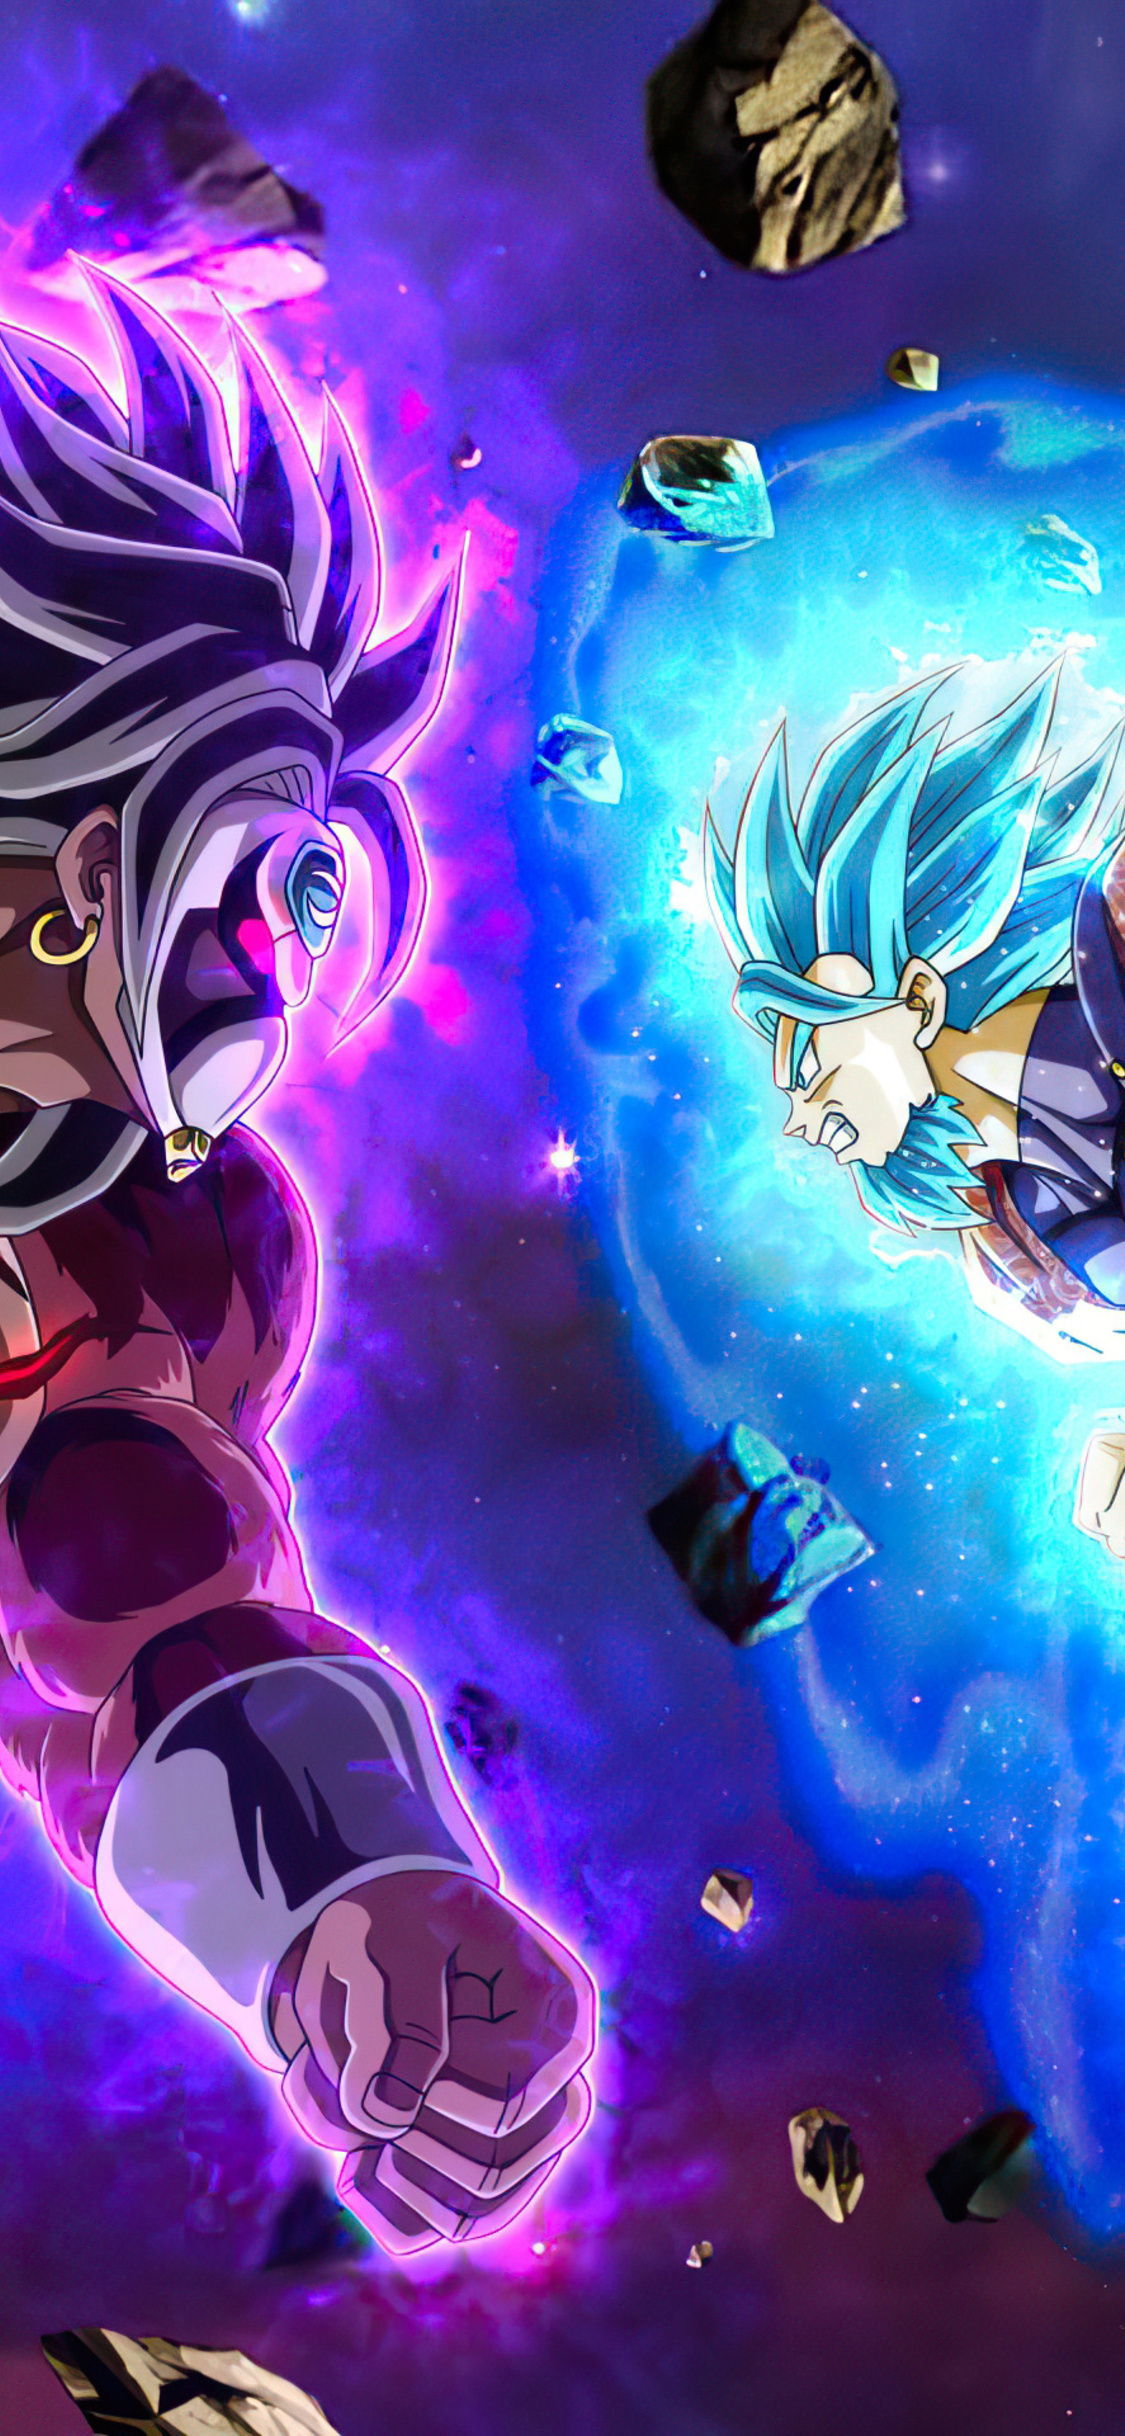 Saiyan OC Vs Dark Broly iPhone XS, iPhone iPhone X HD 4k Wallpaper, Image, Background, Photo and Picture